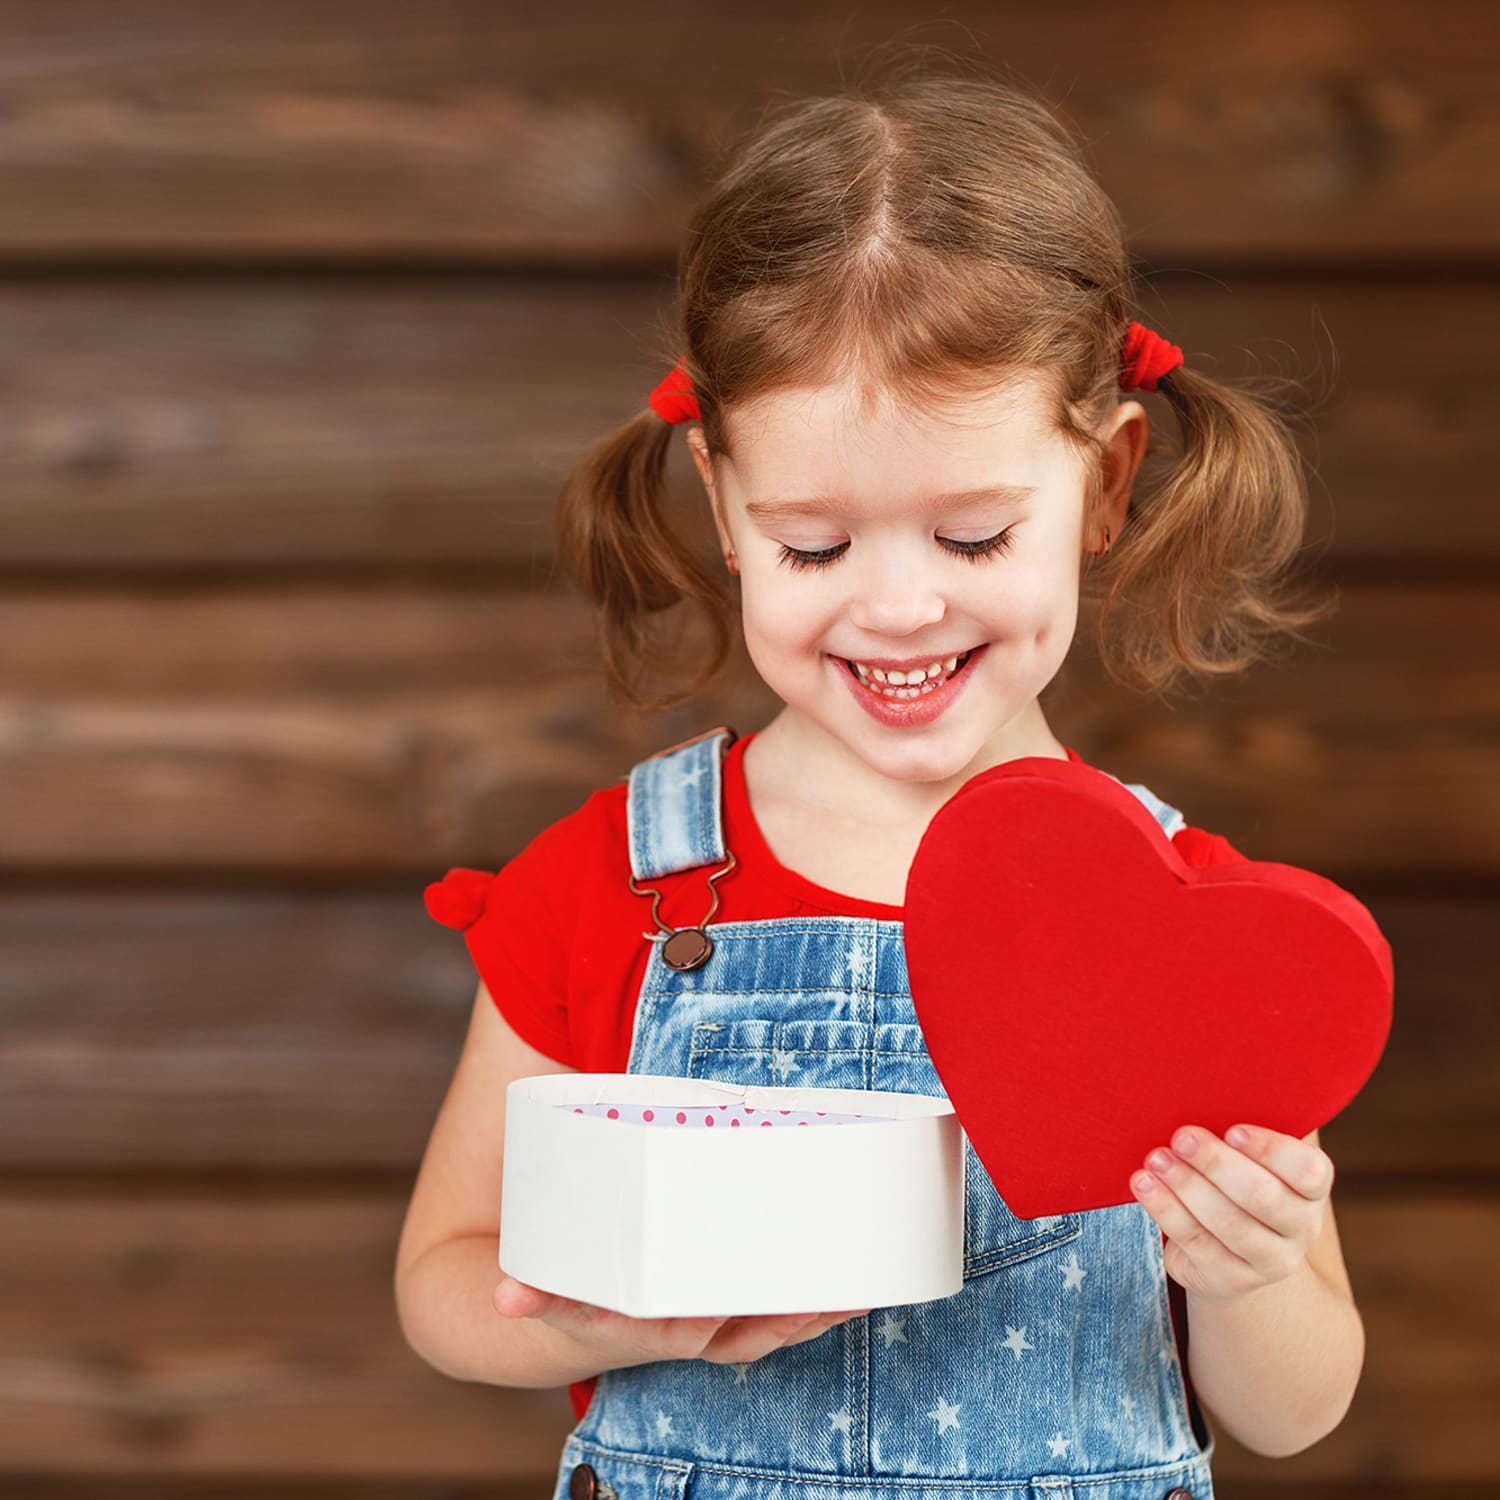 Over 20 Valentines Day Gift Ideas for Kids